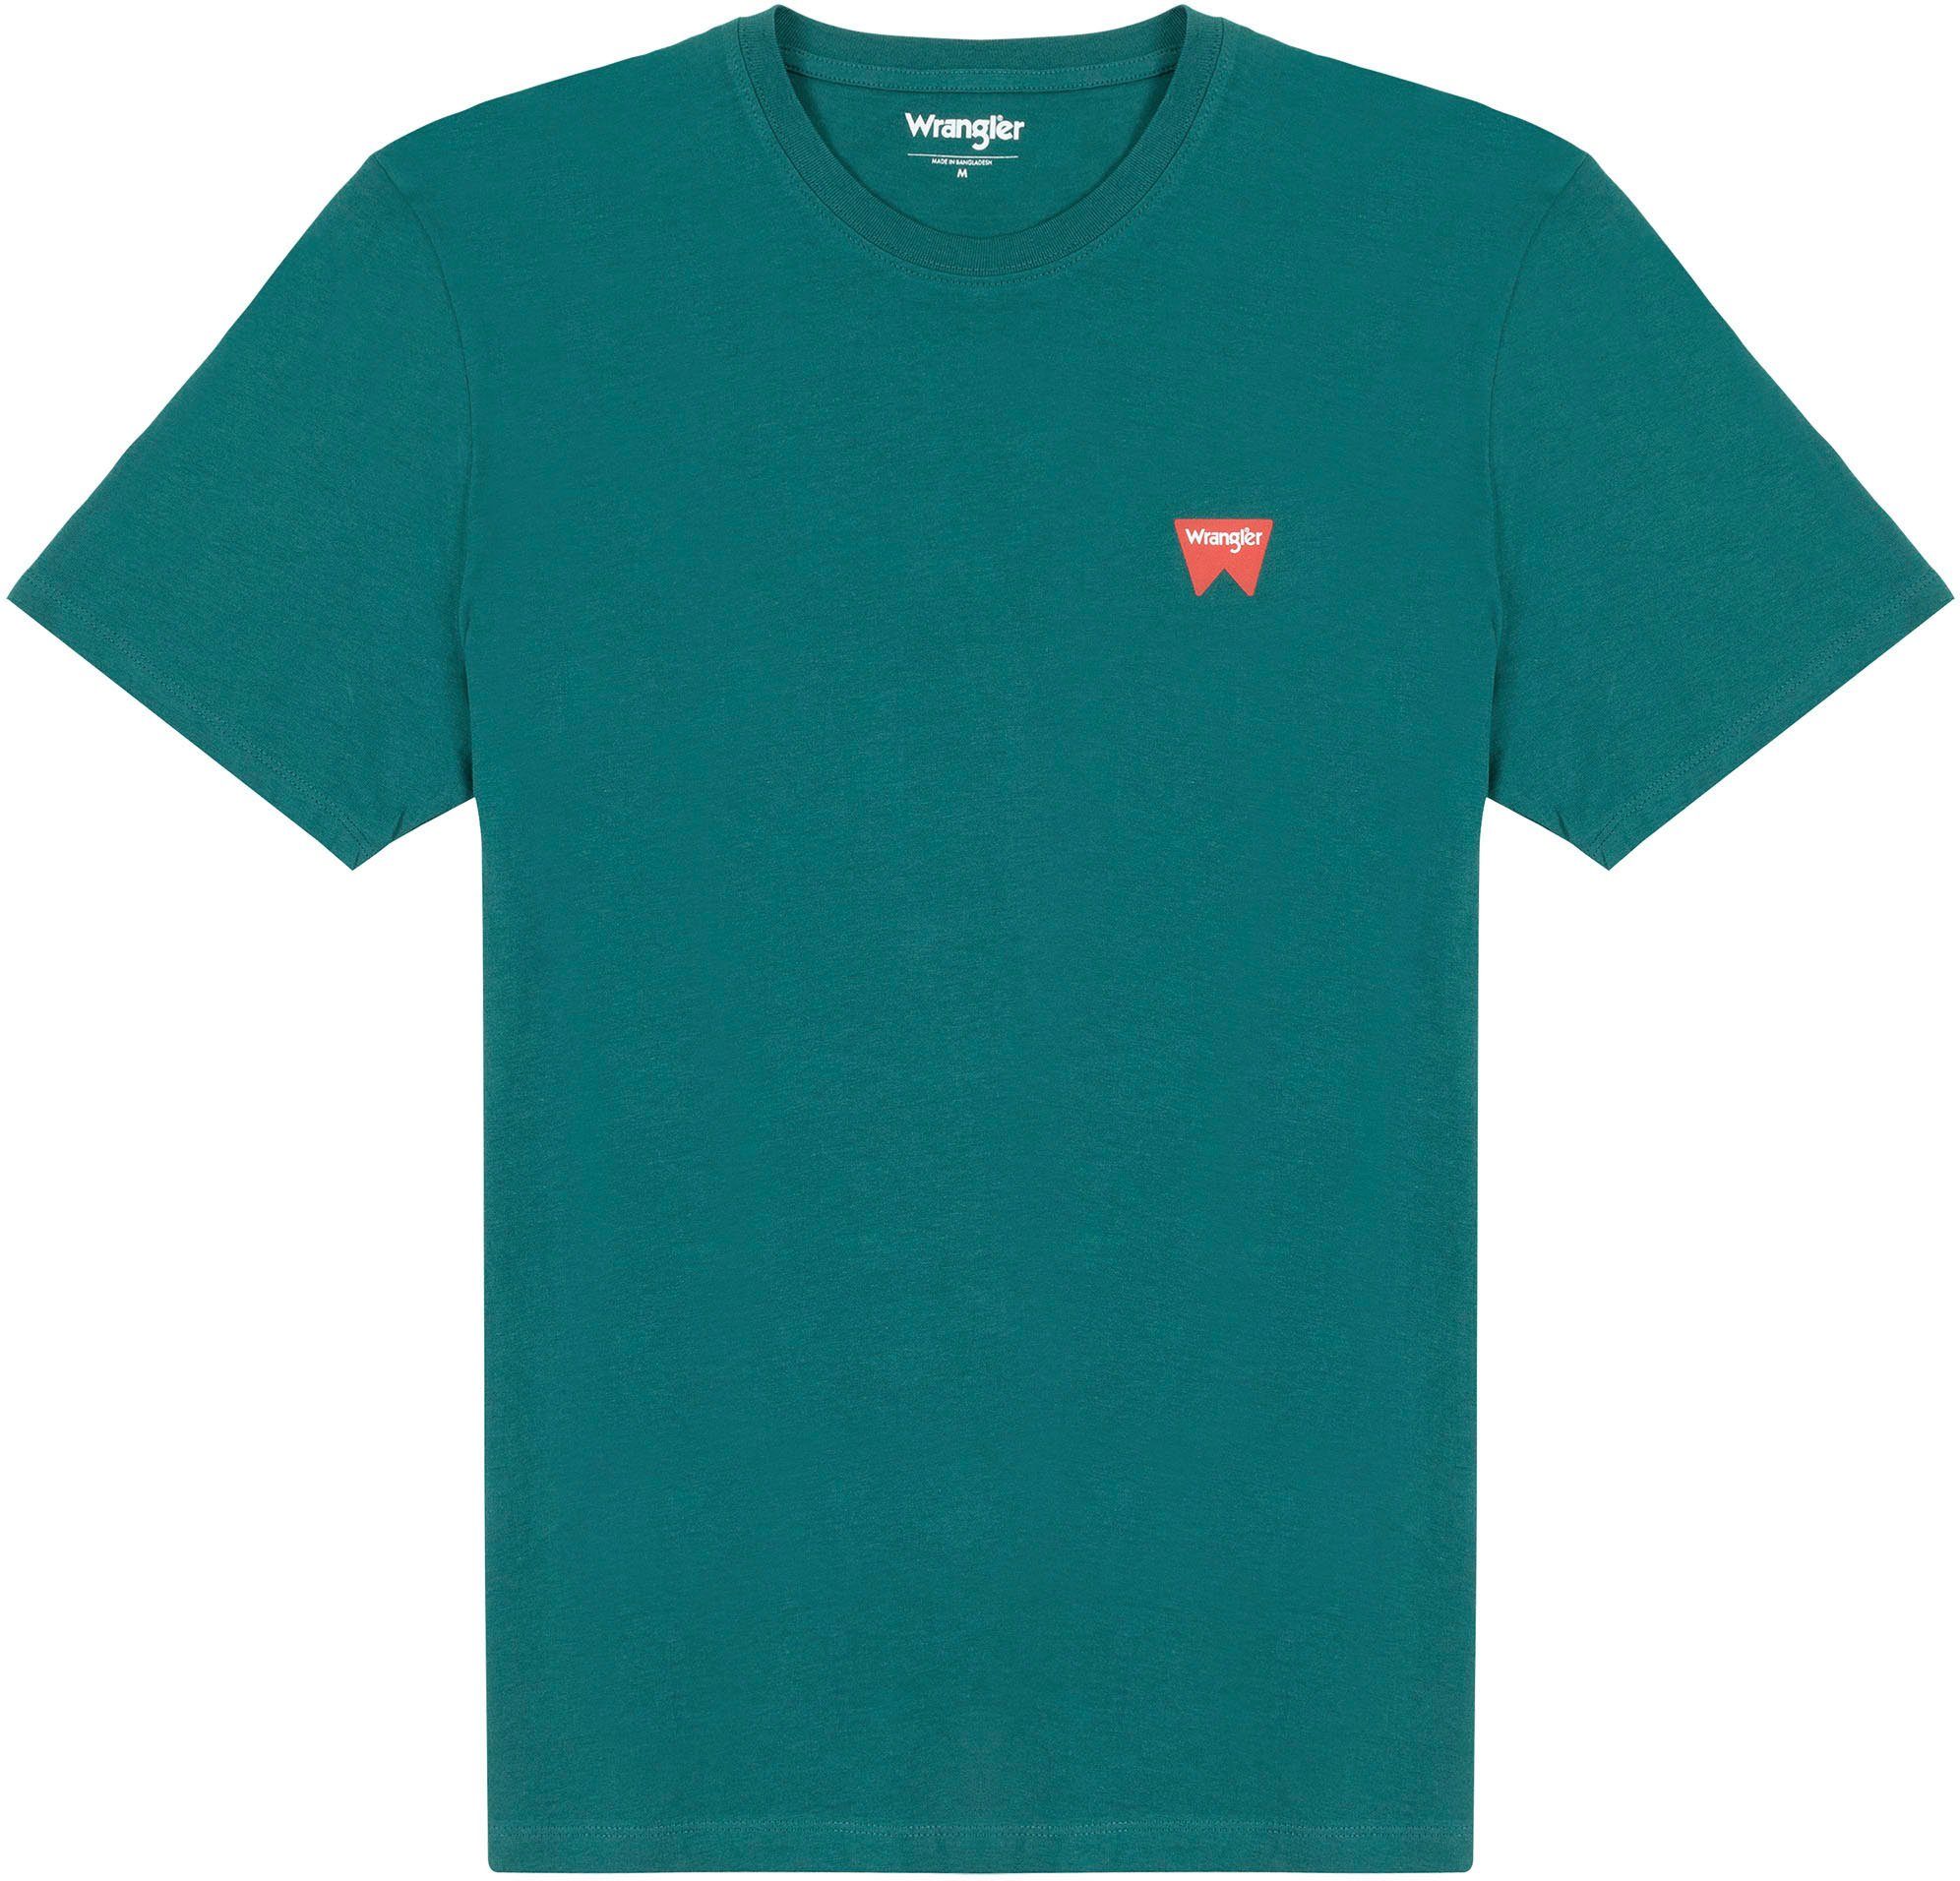 Wrangler T-Shirt Sign-Off bayberry green